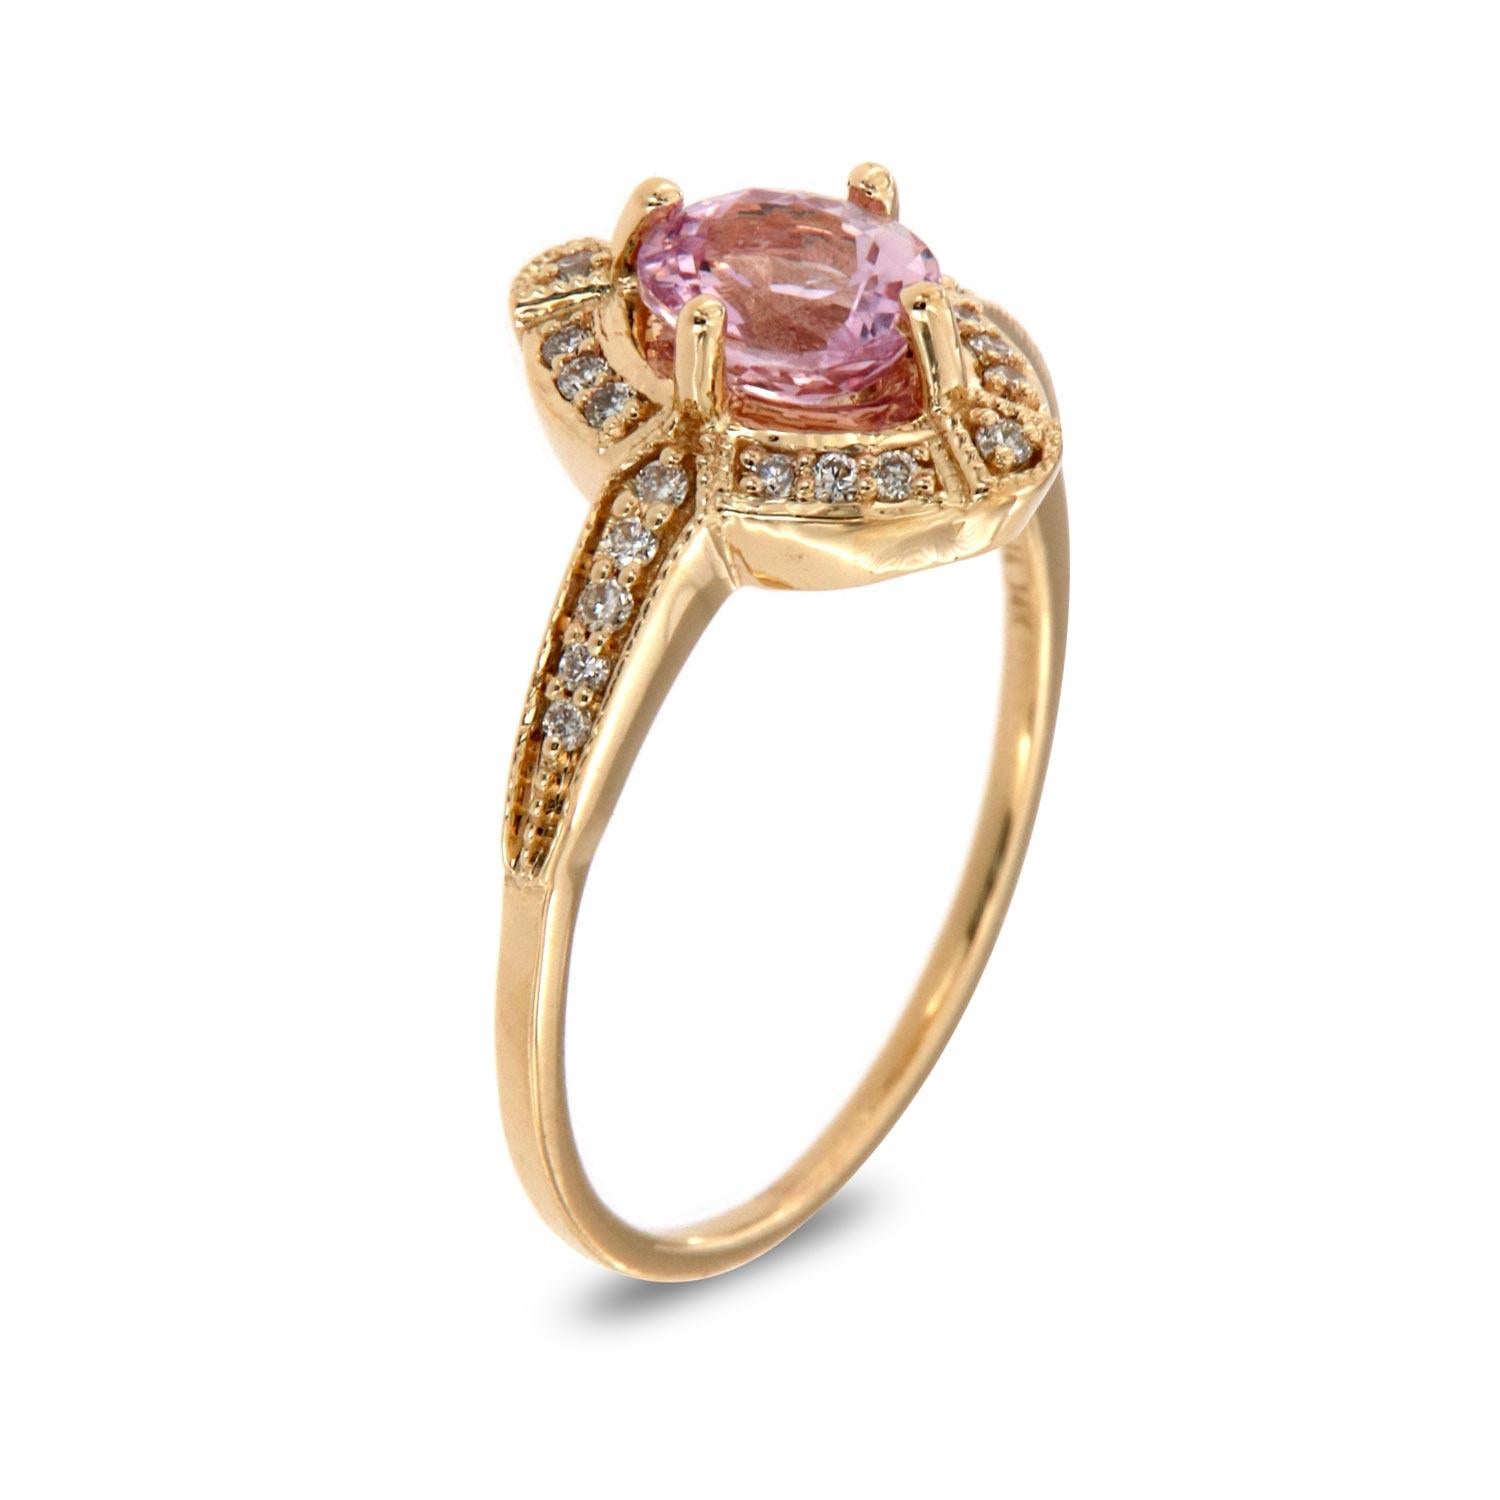 This petite organic style halo ring is impressive in its vintage appeal, featuring a natural pink oval sapphire, accented with milgrain and round brilliant diamonds. Experience the difference in person!

Product details: 

Center Gemstone Type: